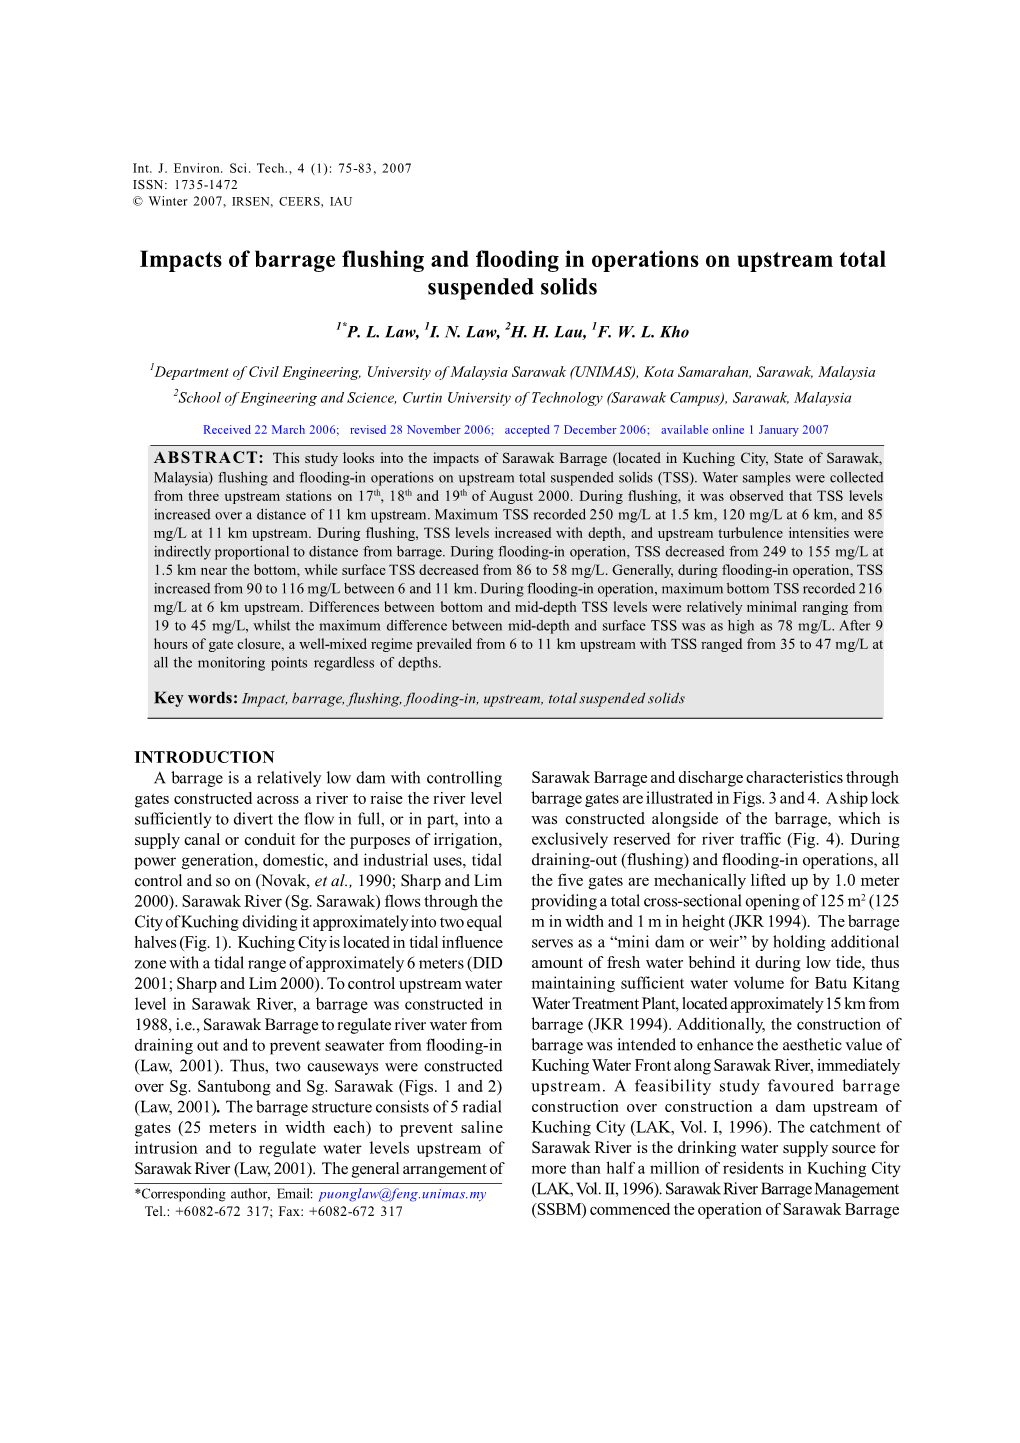 Impacts of Barrage Flushing and Flooding in Operations on Upstream Total Suspended Solids